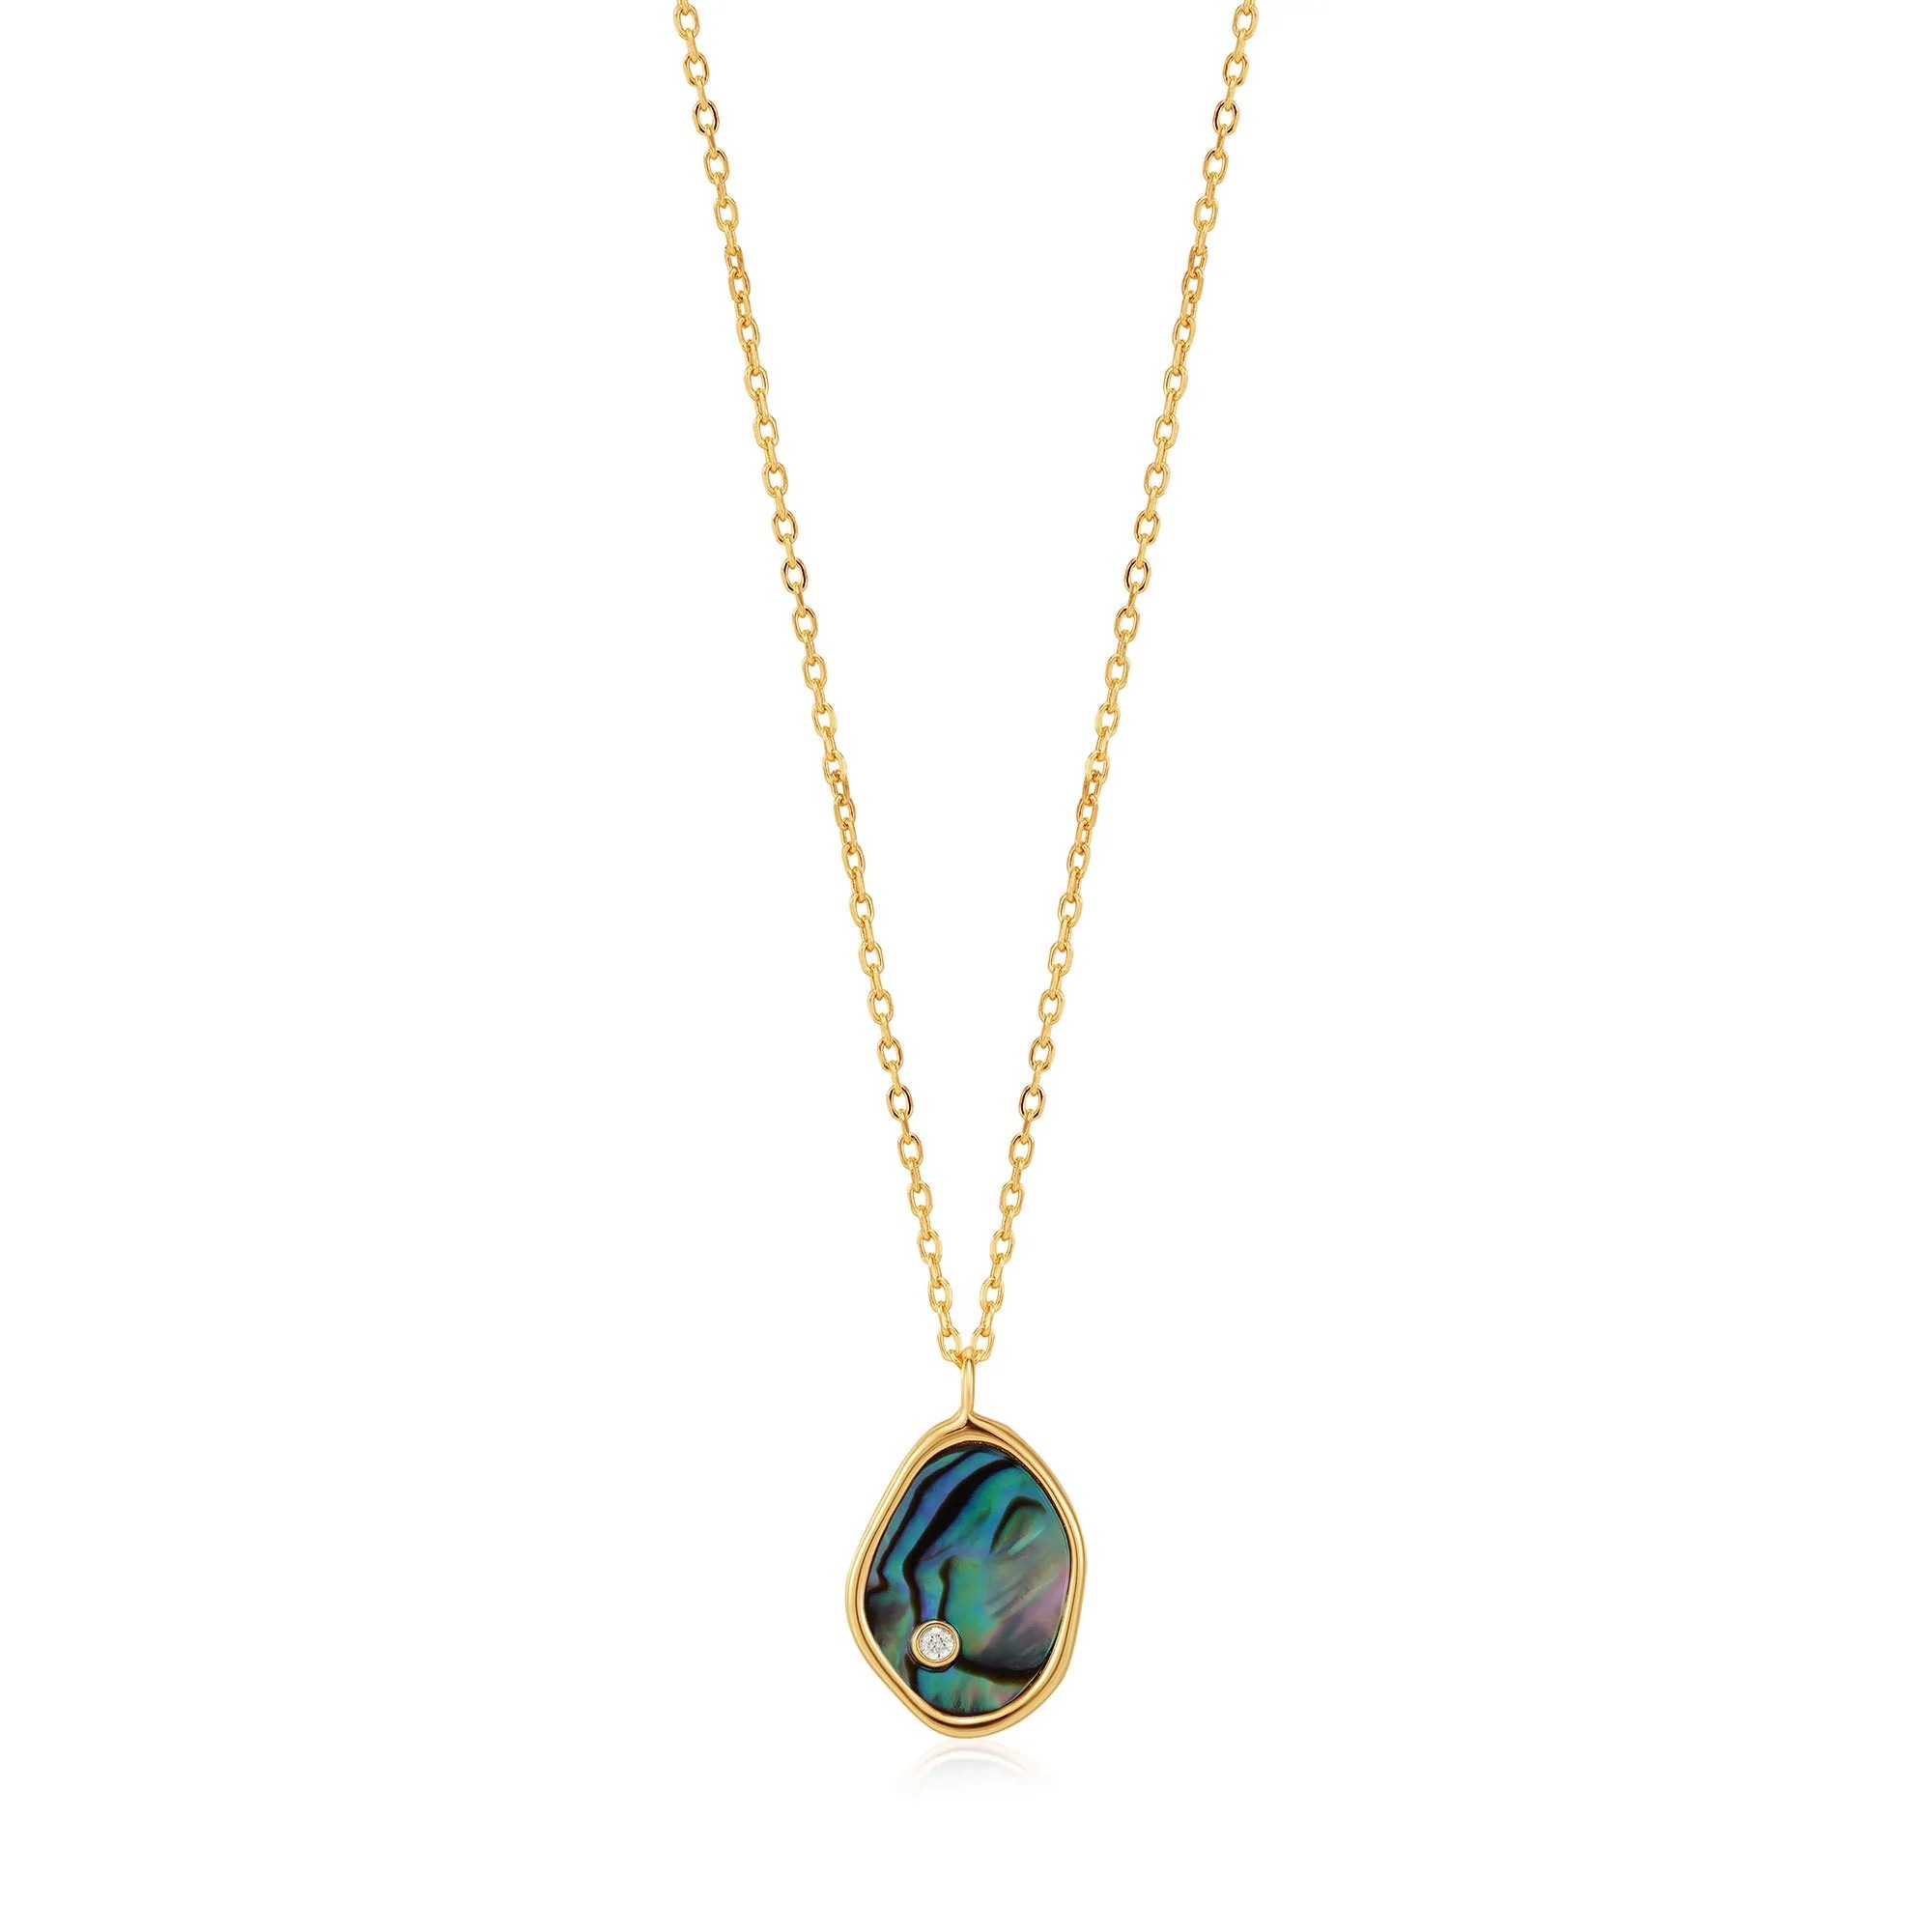 ANIA HAIE Tidal Abalone Pendant Necklace, Gold-Plate